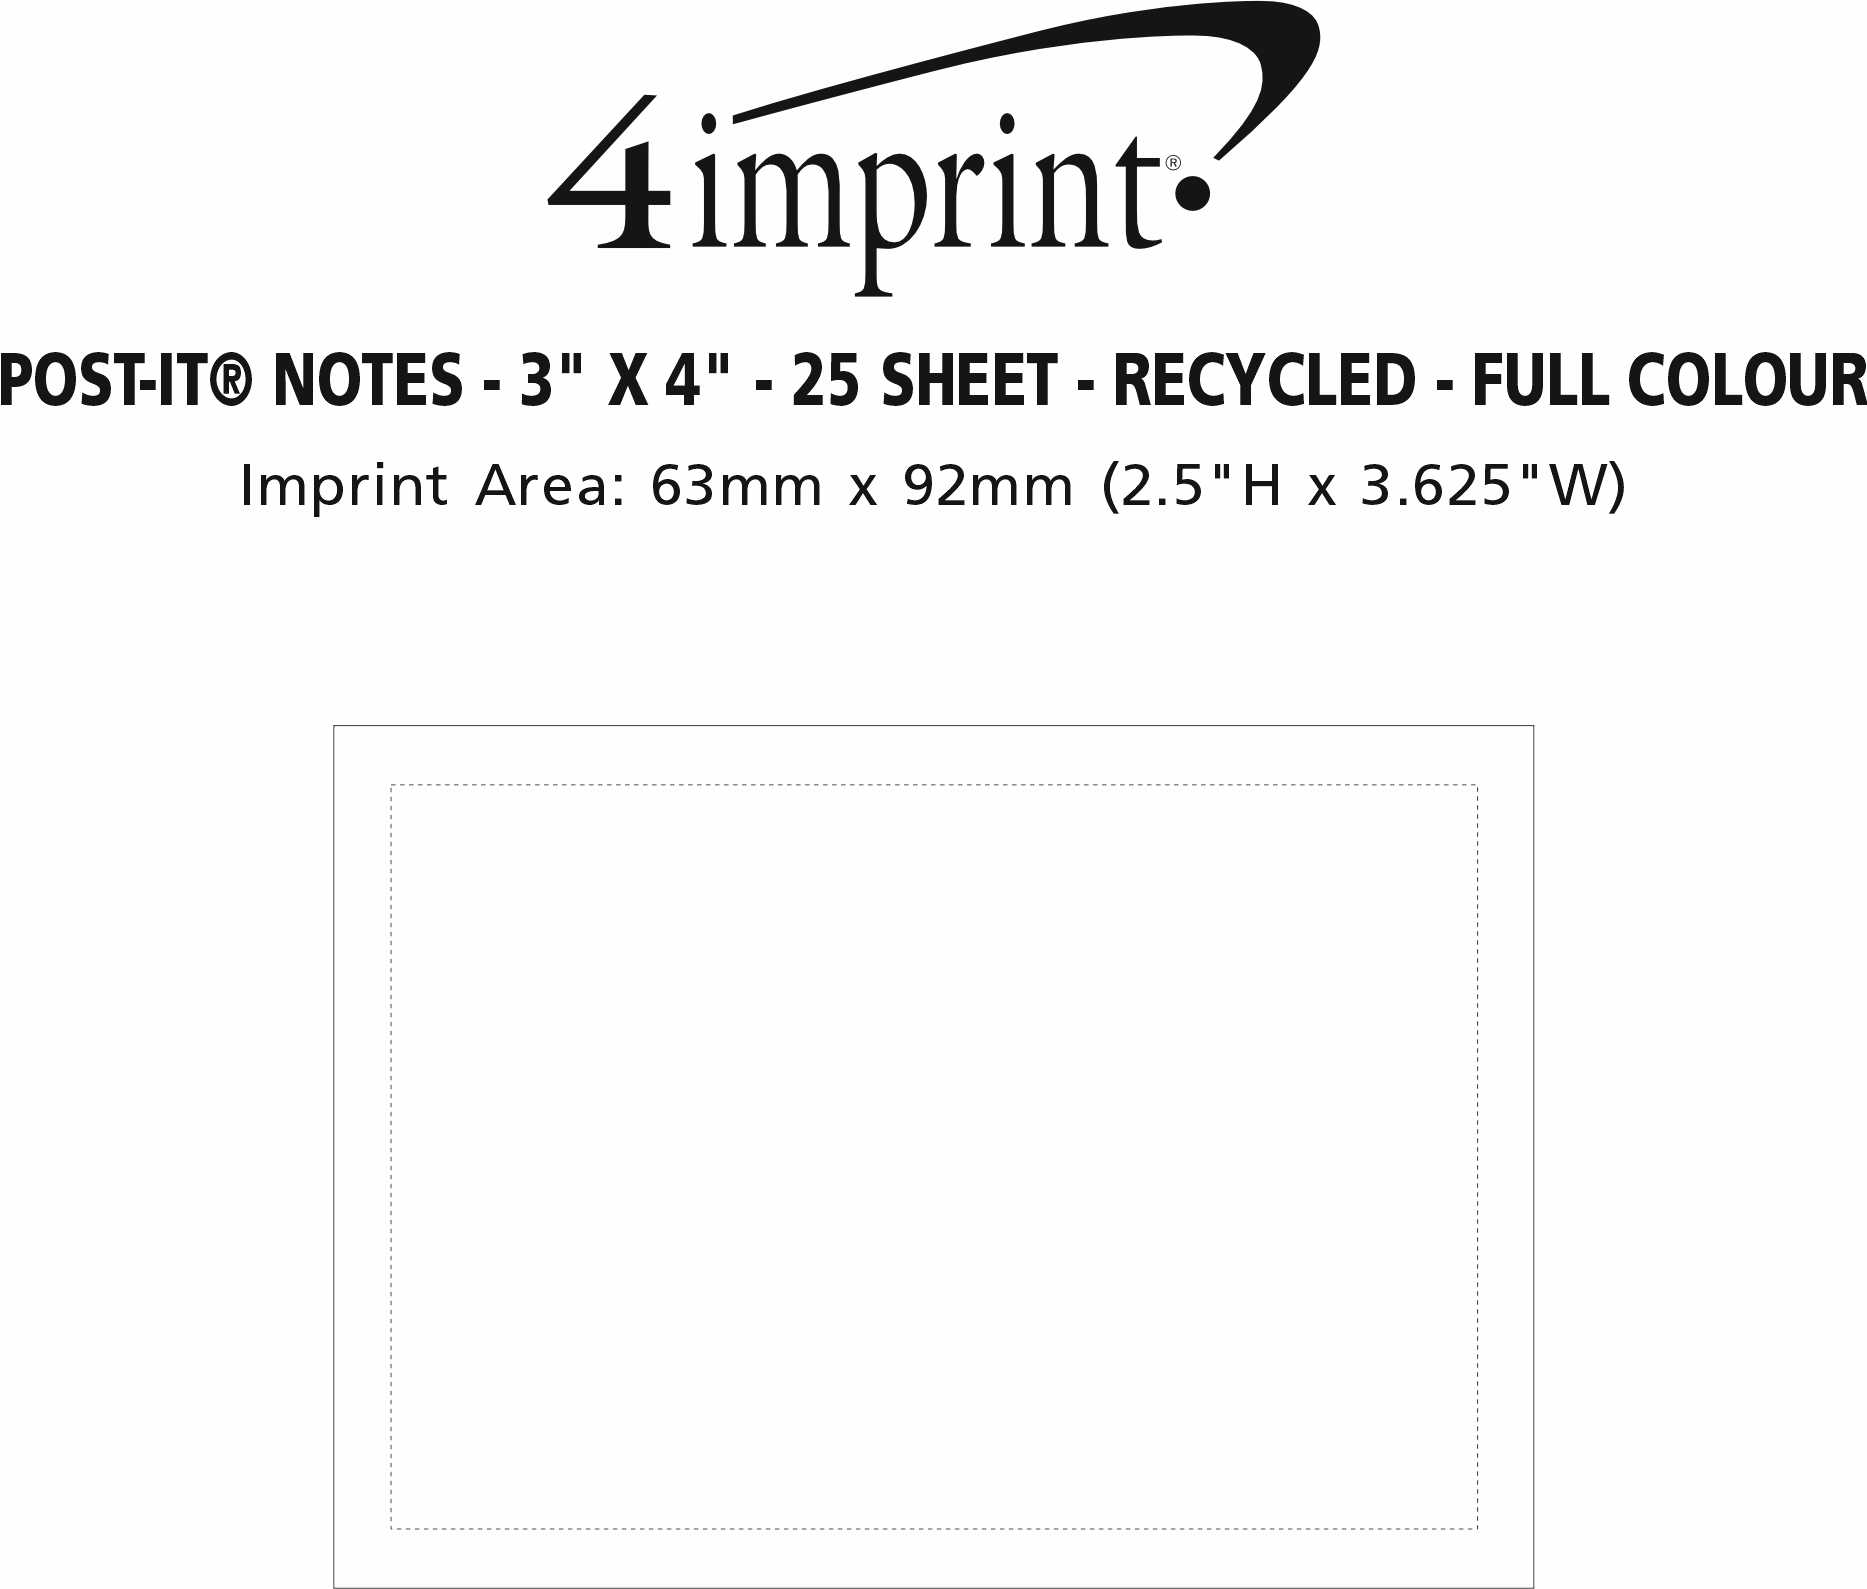 Imprint Area of Post-it® Notes - 3" x 4" - 25 Sheet - Recycled - Full Colour